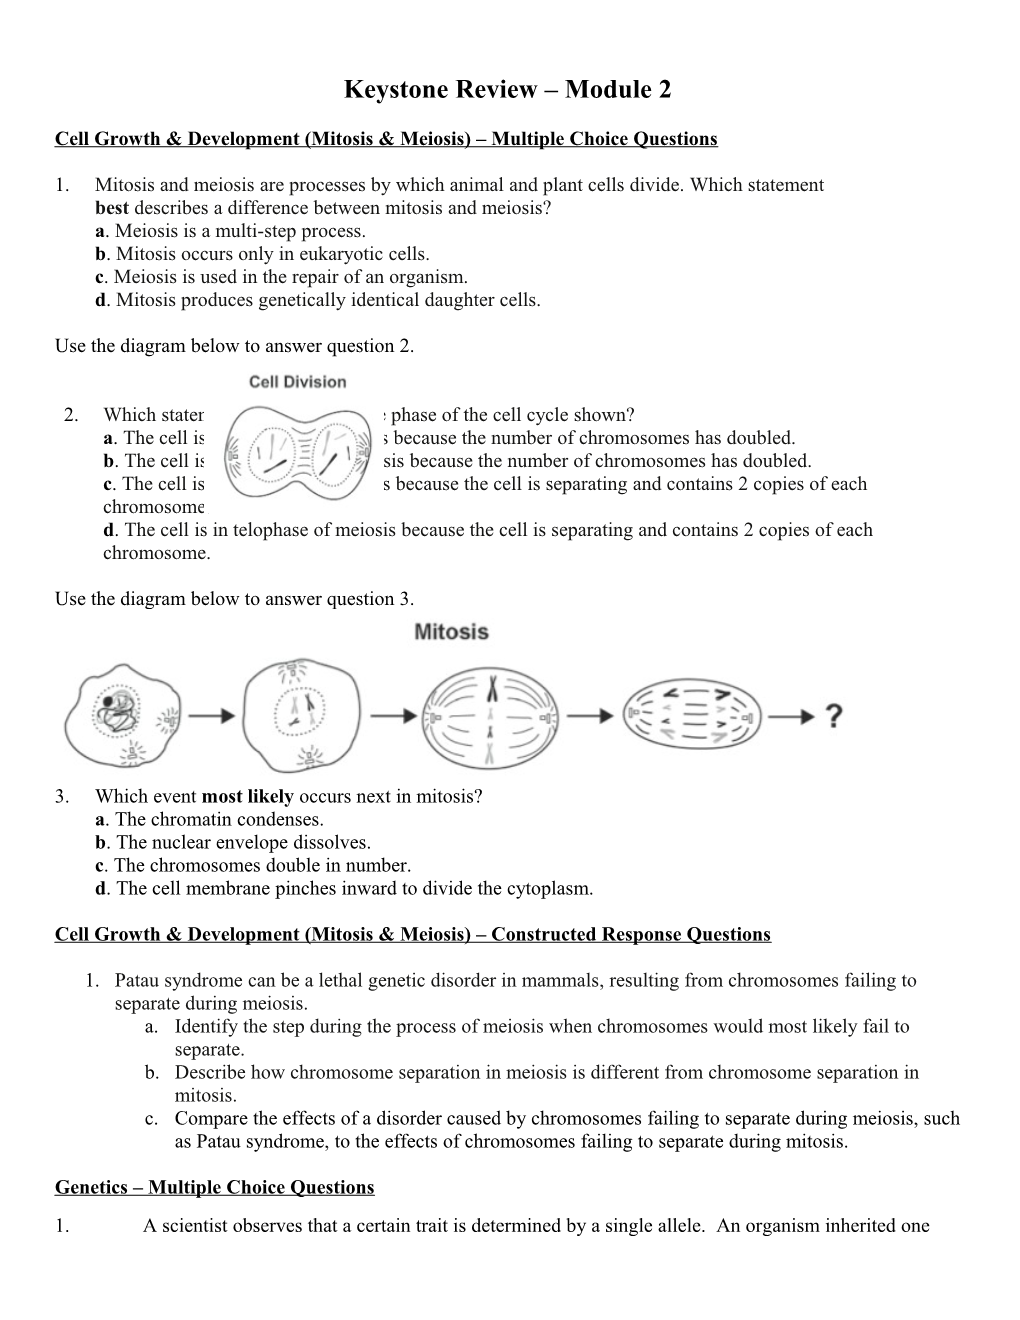 Cell Growth & Development (Mitosis & Meiosis) Multiple Choice Questions